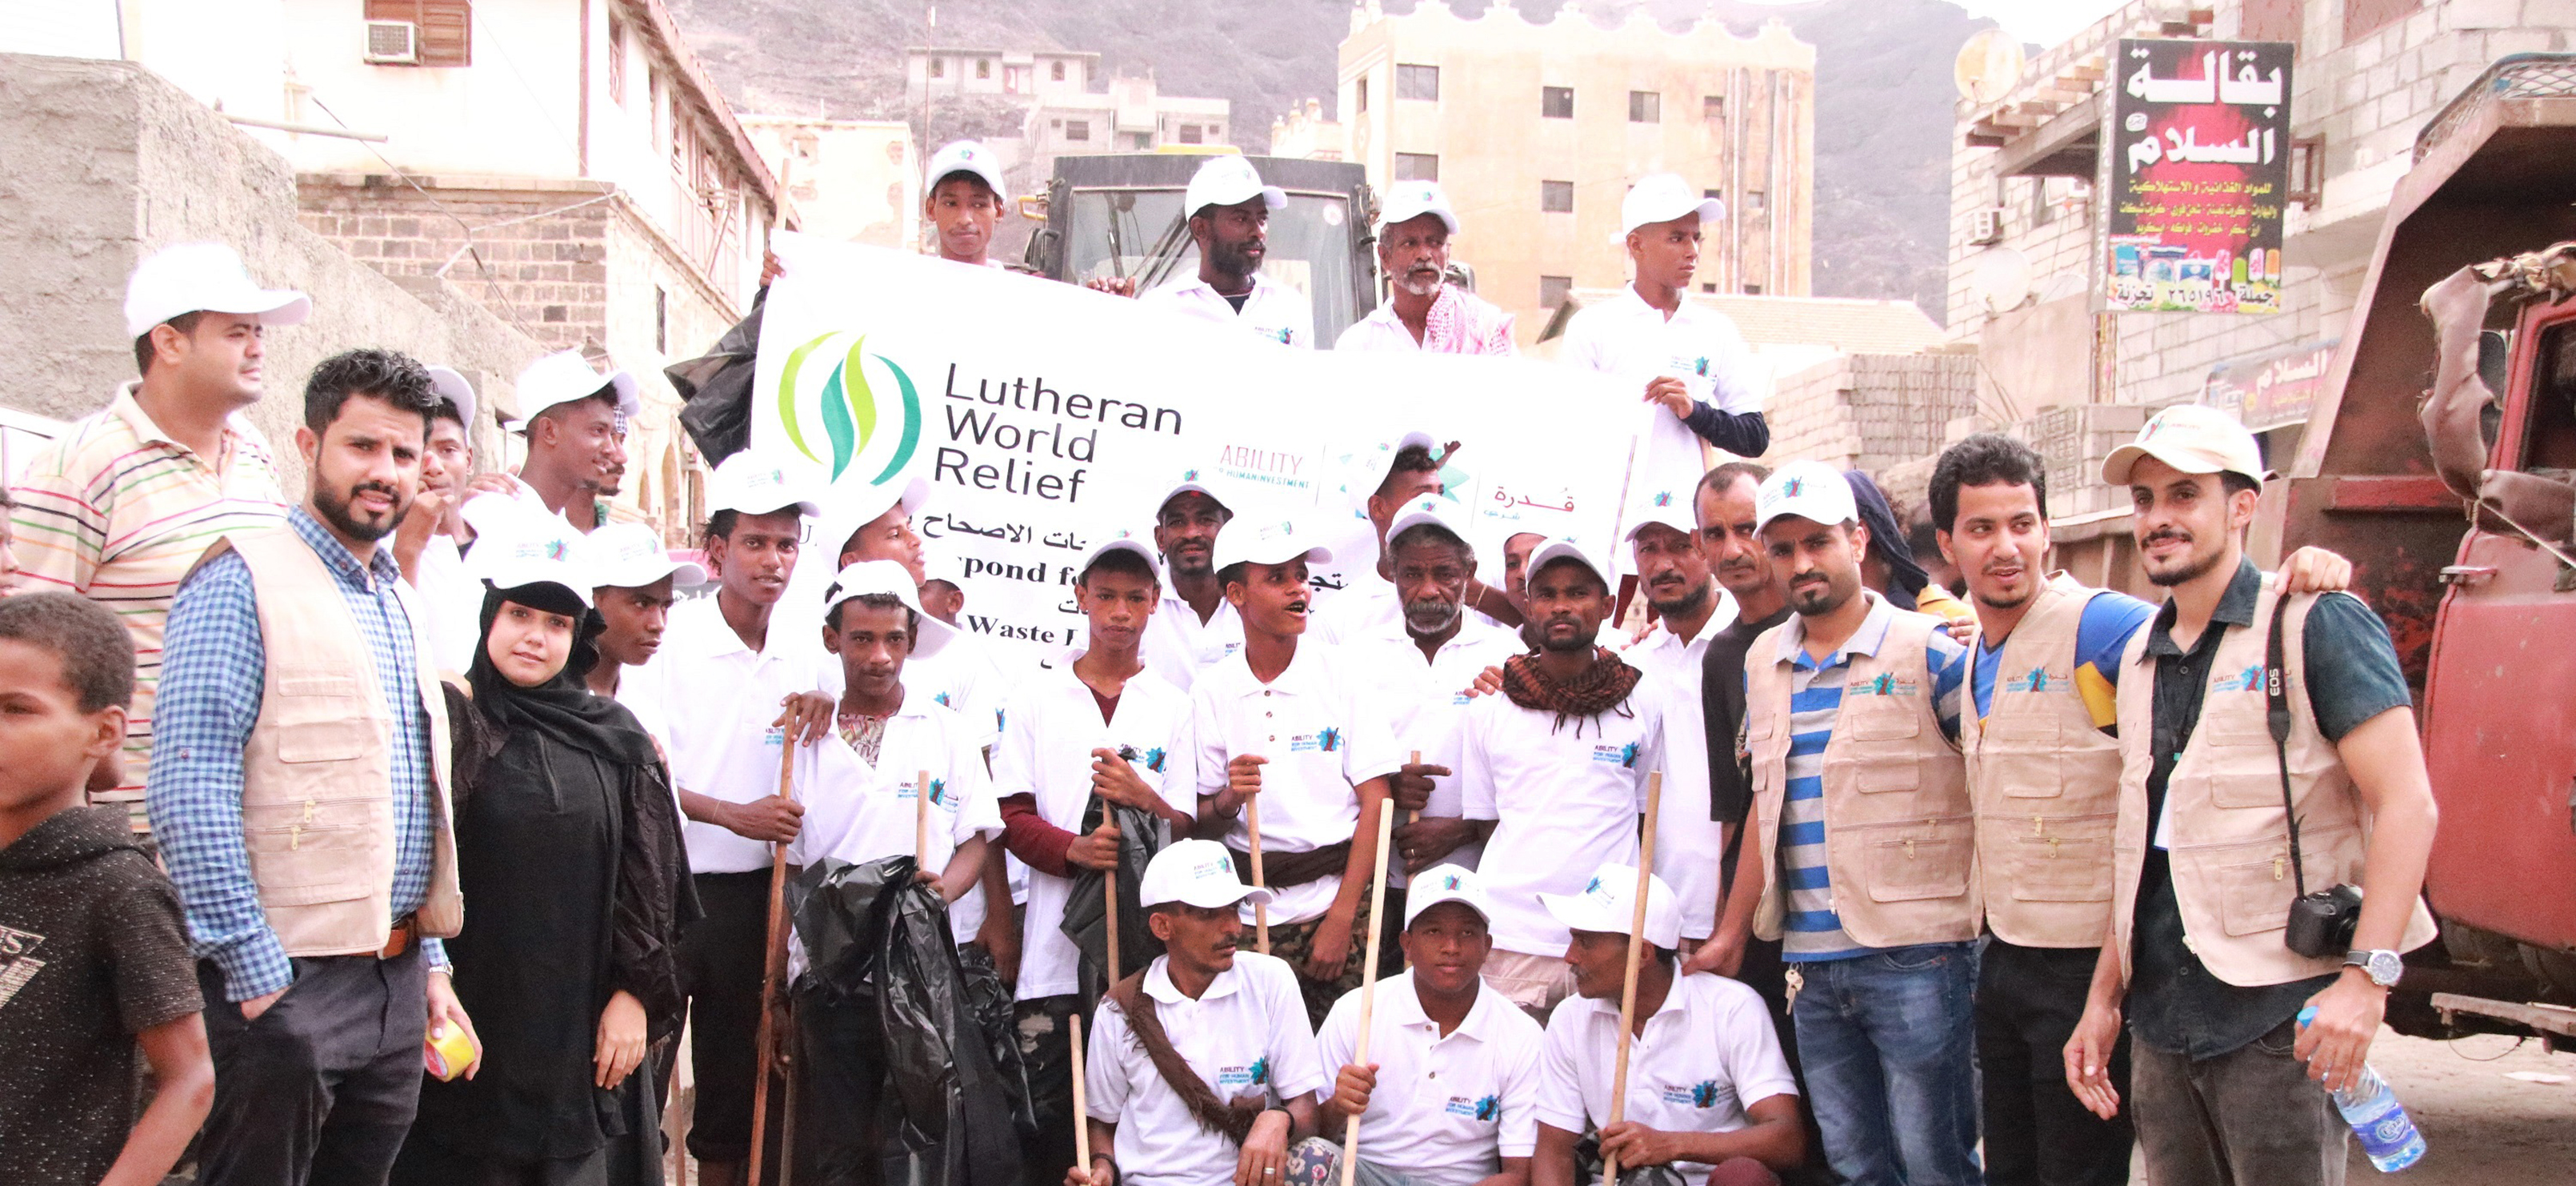 A group of LWR staff and local partner staff stand in the streets of Aden with a Lutheran World Relief sign after a cleanup campaign